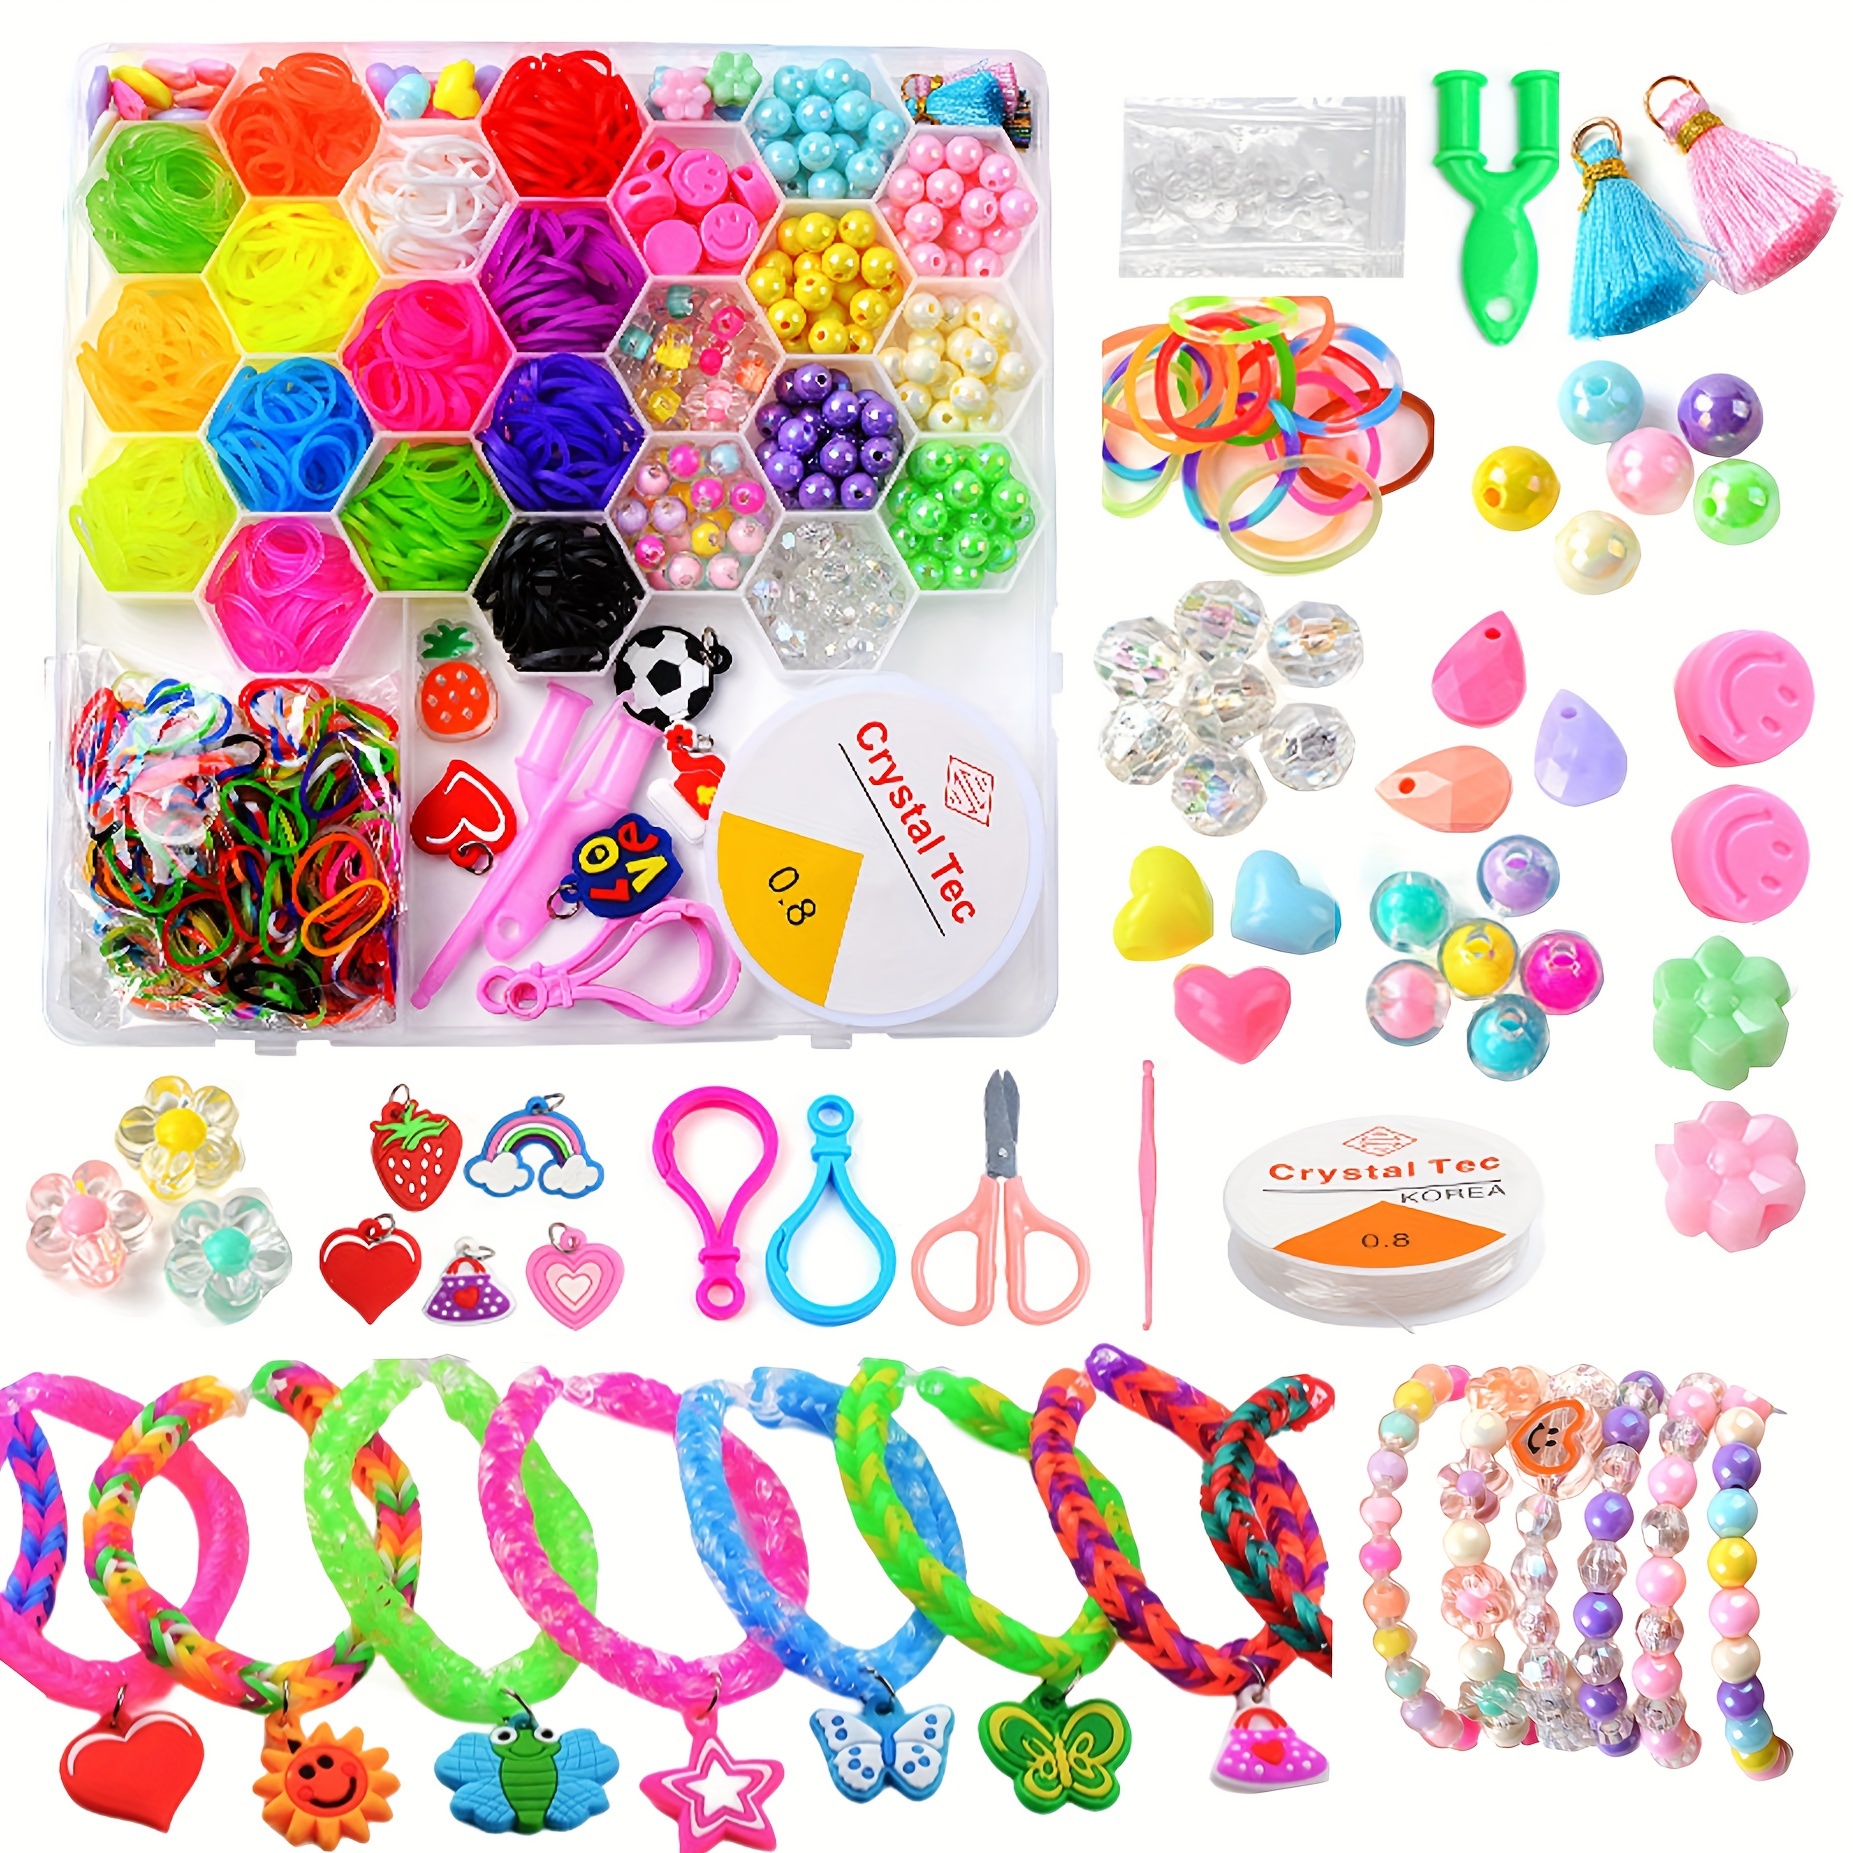 Best loom bands kits to make your own friendship bracelets